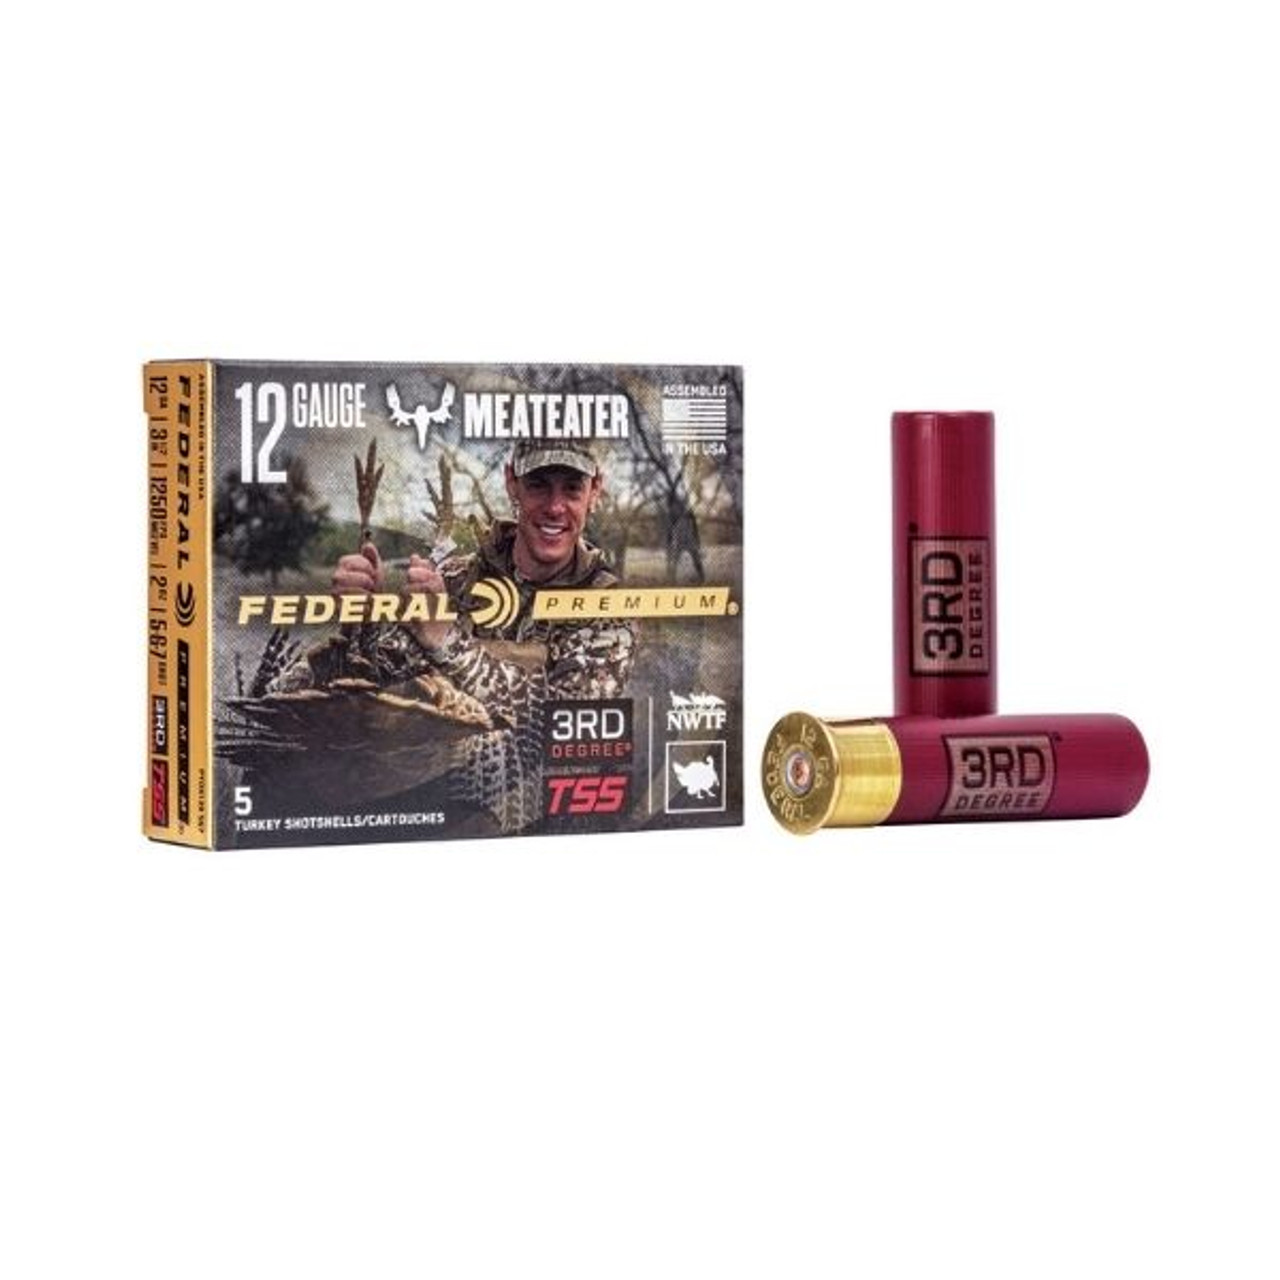 Federal Premium 3rd Degree has redefined turkey shotshell performance once again with the addition of the FLITECONTROL FLEX wad. The system performs through both standard and ported turkey chokes, opening from the rear and staying with the shot column longer for full, consistent patterns. Rather than simply pattern tightly like conventional loads, 3rd Degree uses a three-stage payload consisting of No. 5 copper-plated lead, No. 6 FLITESTOPPER lead and now No. 7 HEAVYWEIGHT TSS shot to deliver larger, more forgiving patterns at close range, while still providing deadly performance at long distance.